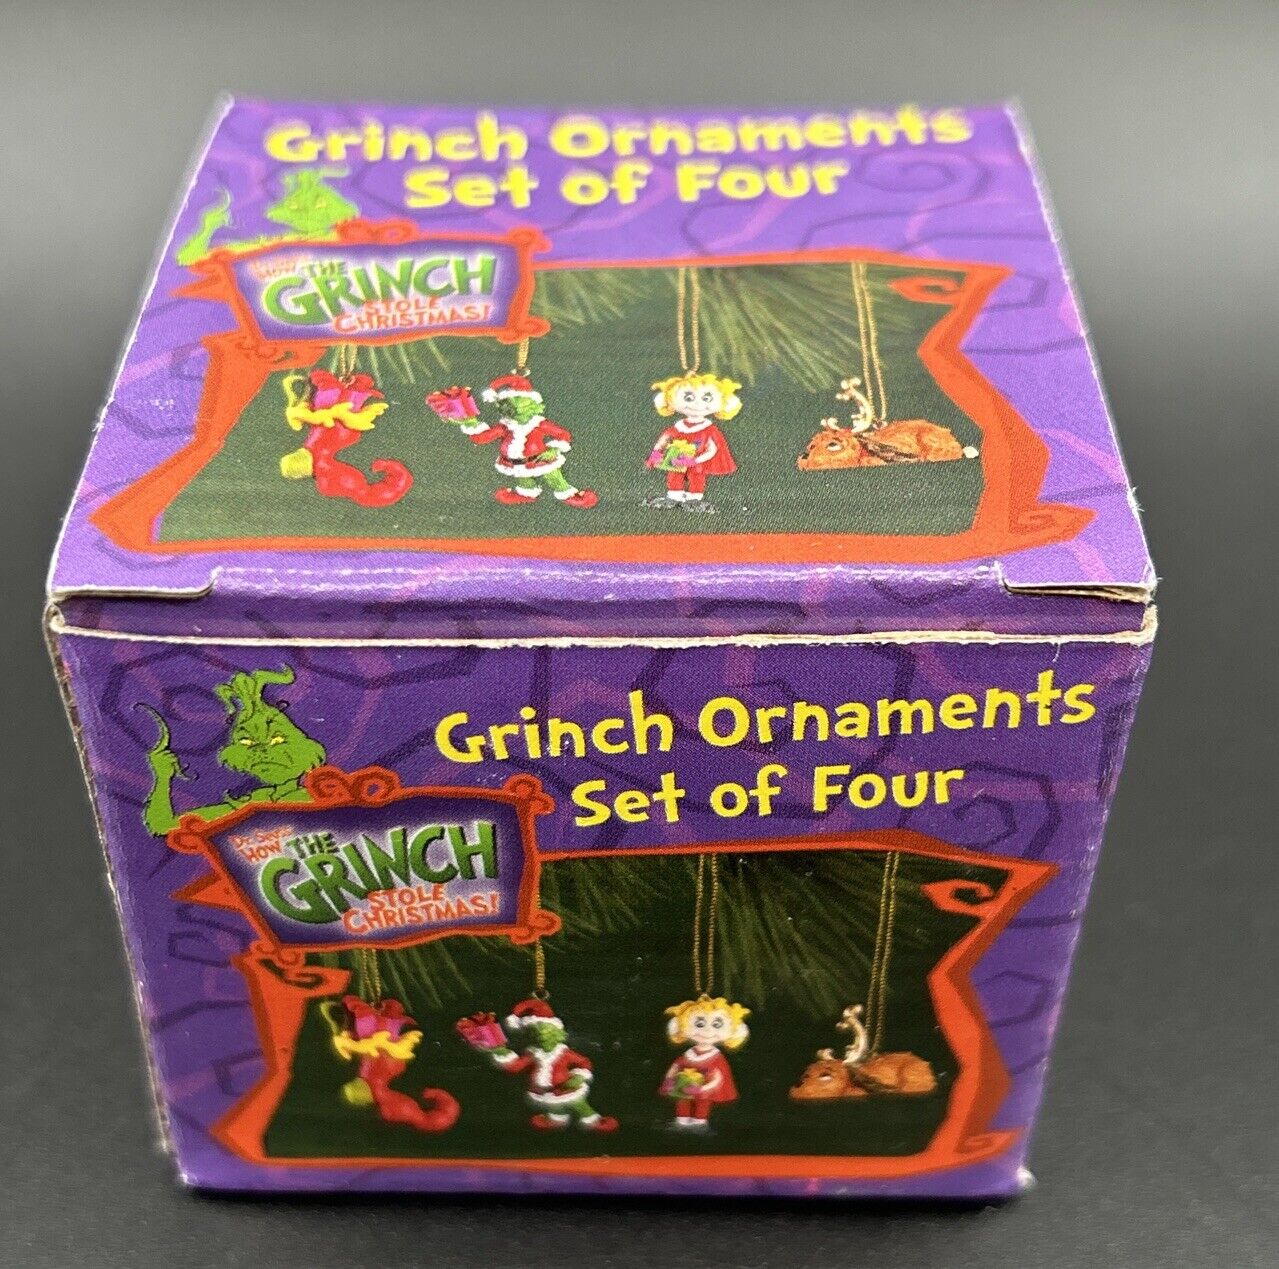 How The Grinch Stole Christmas Mini Ornaments In Original Box Set Of 4 New Box